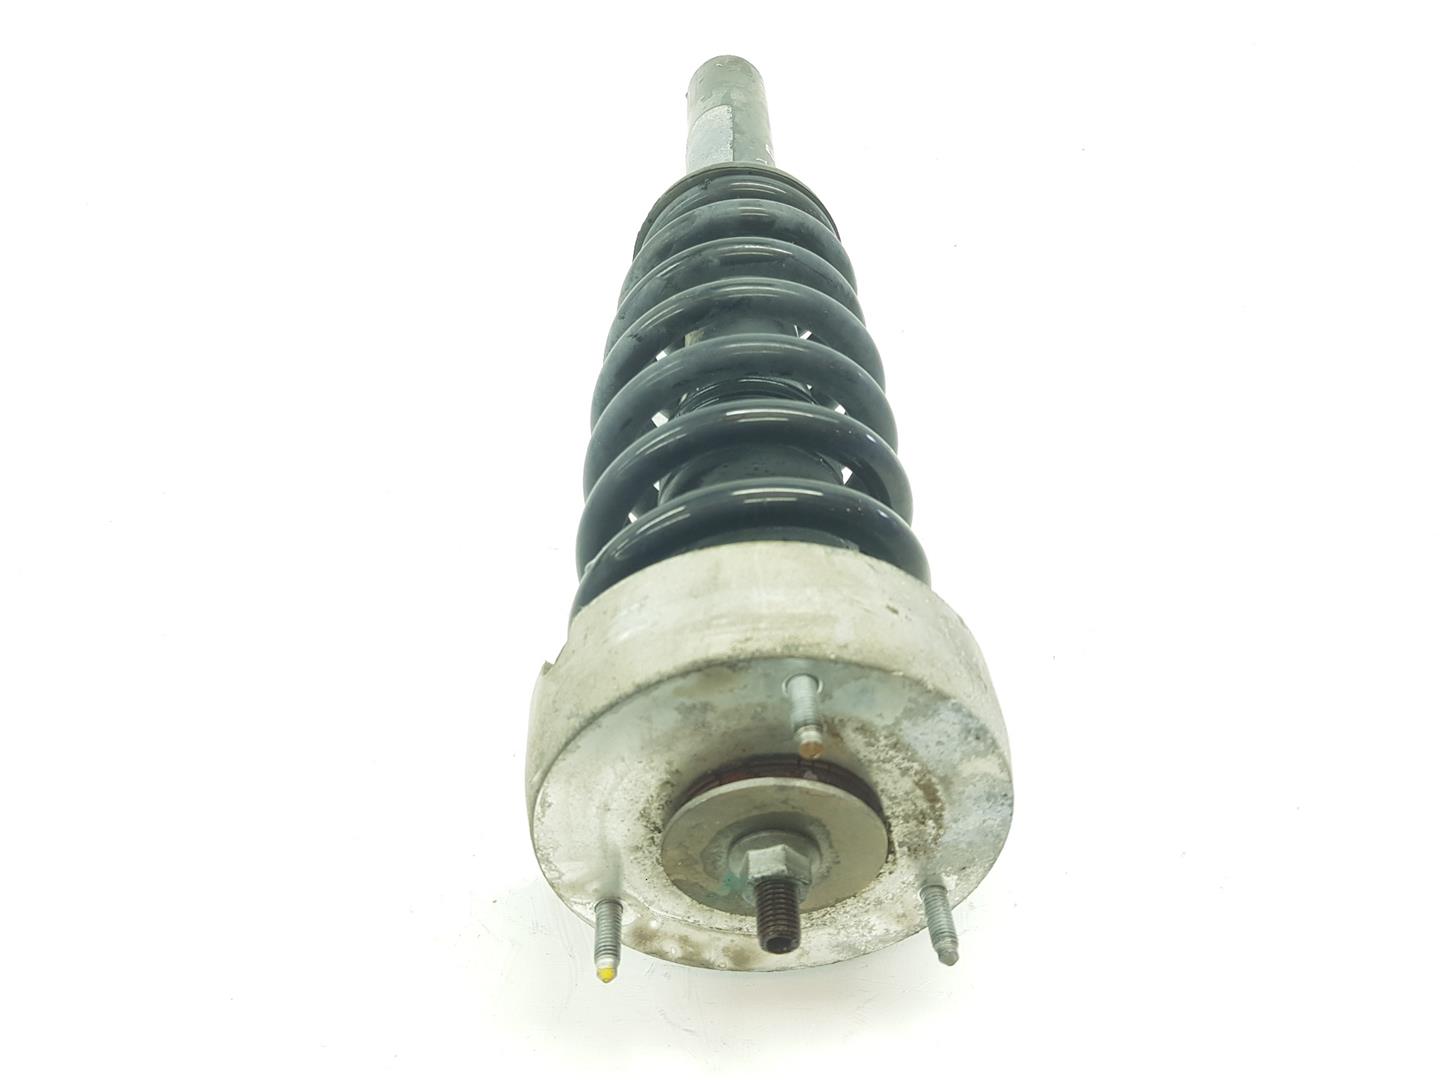 BMW X5 E70 (2006-2013) Front Right Shock Absorber 31326781918, 31326781918 19921855